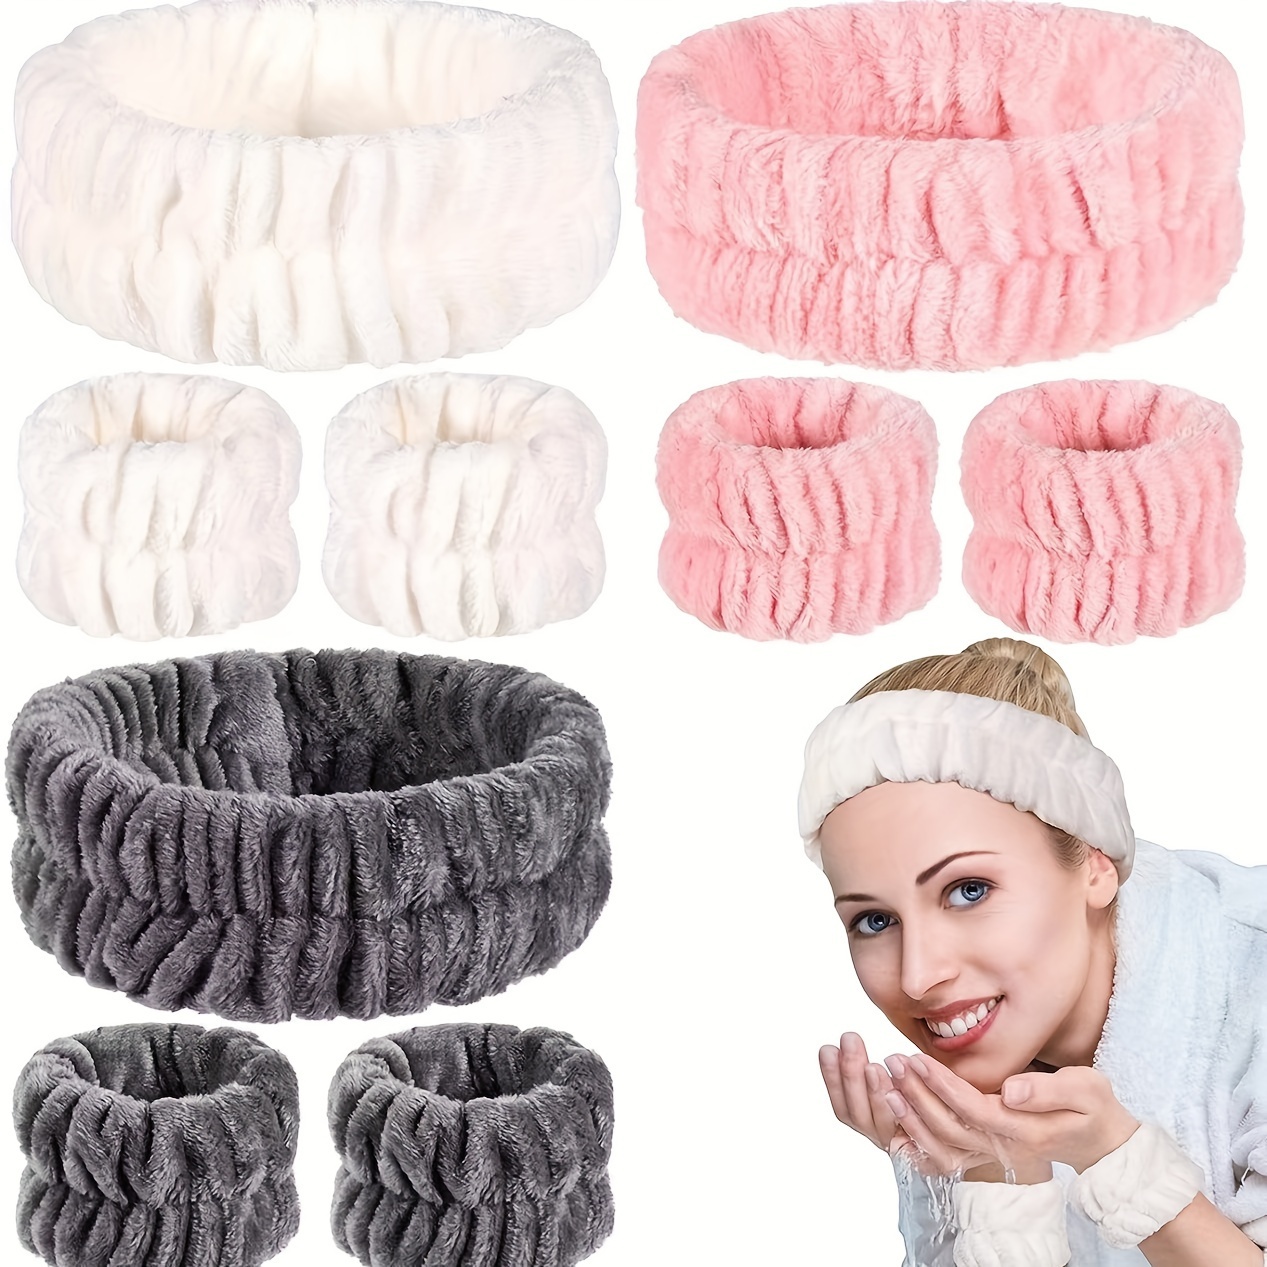 

3pcs/set Bath Headband Wristband Set, Microfiber Wrist Wash Towel Band, Wristbands For Washing Face Makeup, Absorbent Sweatband For Women, Prevent Liquid From Spilling Wet Your Arms